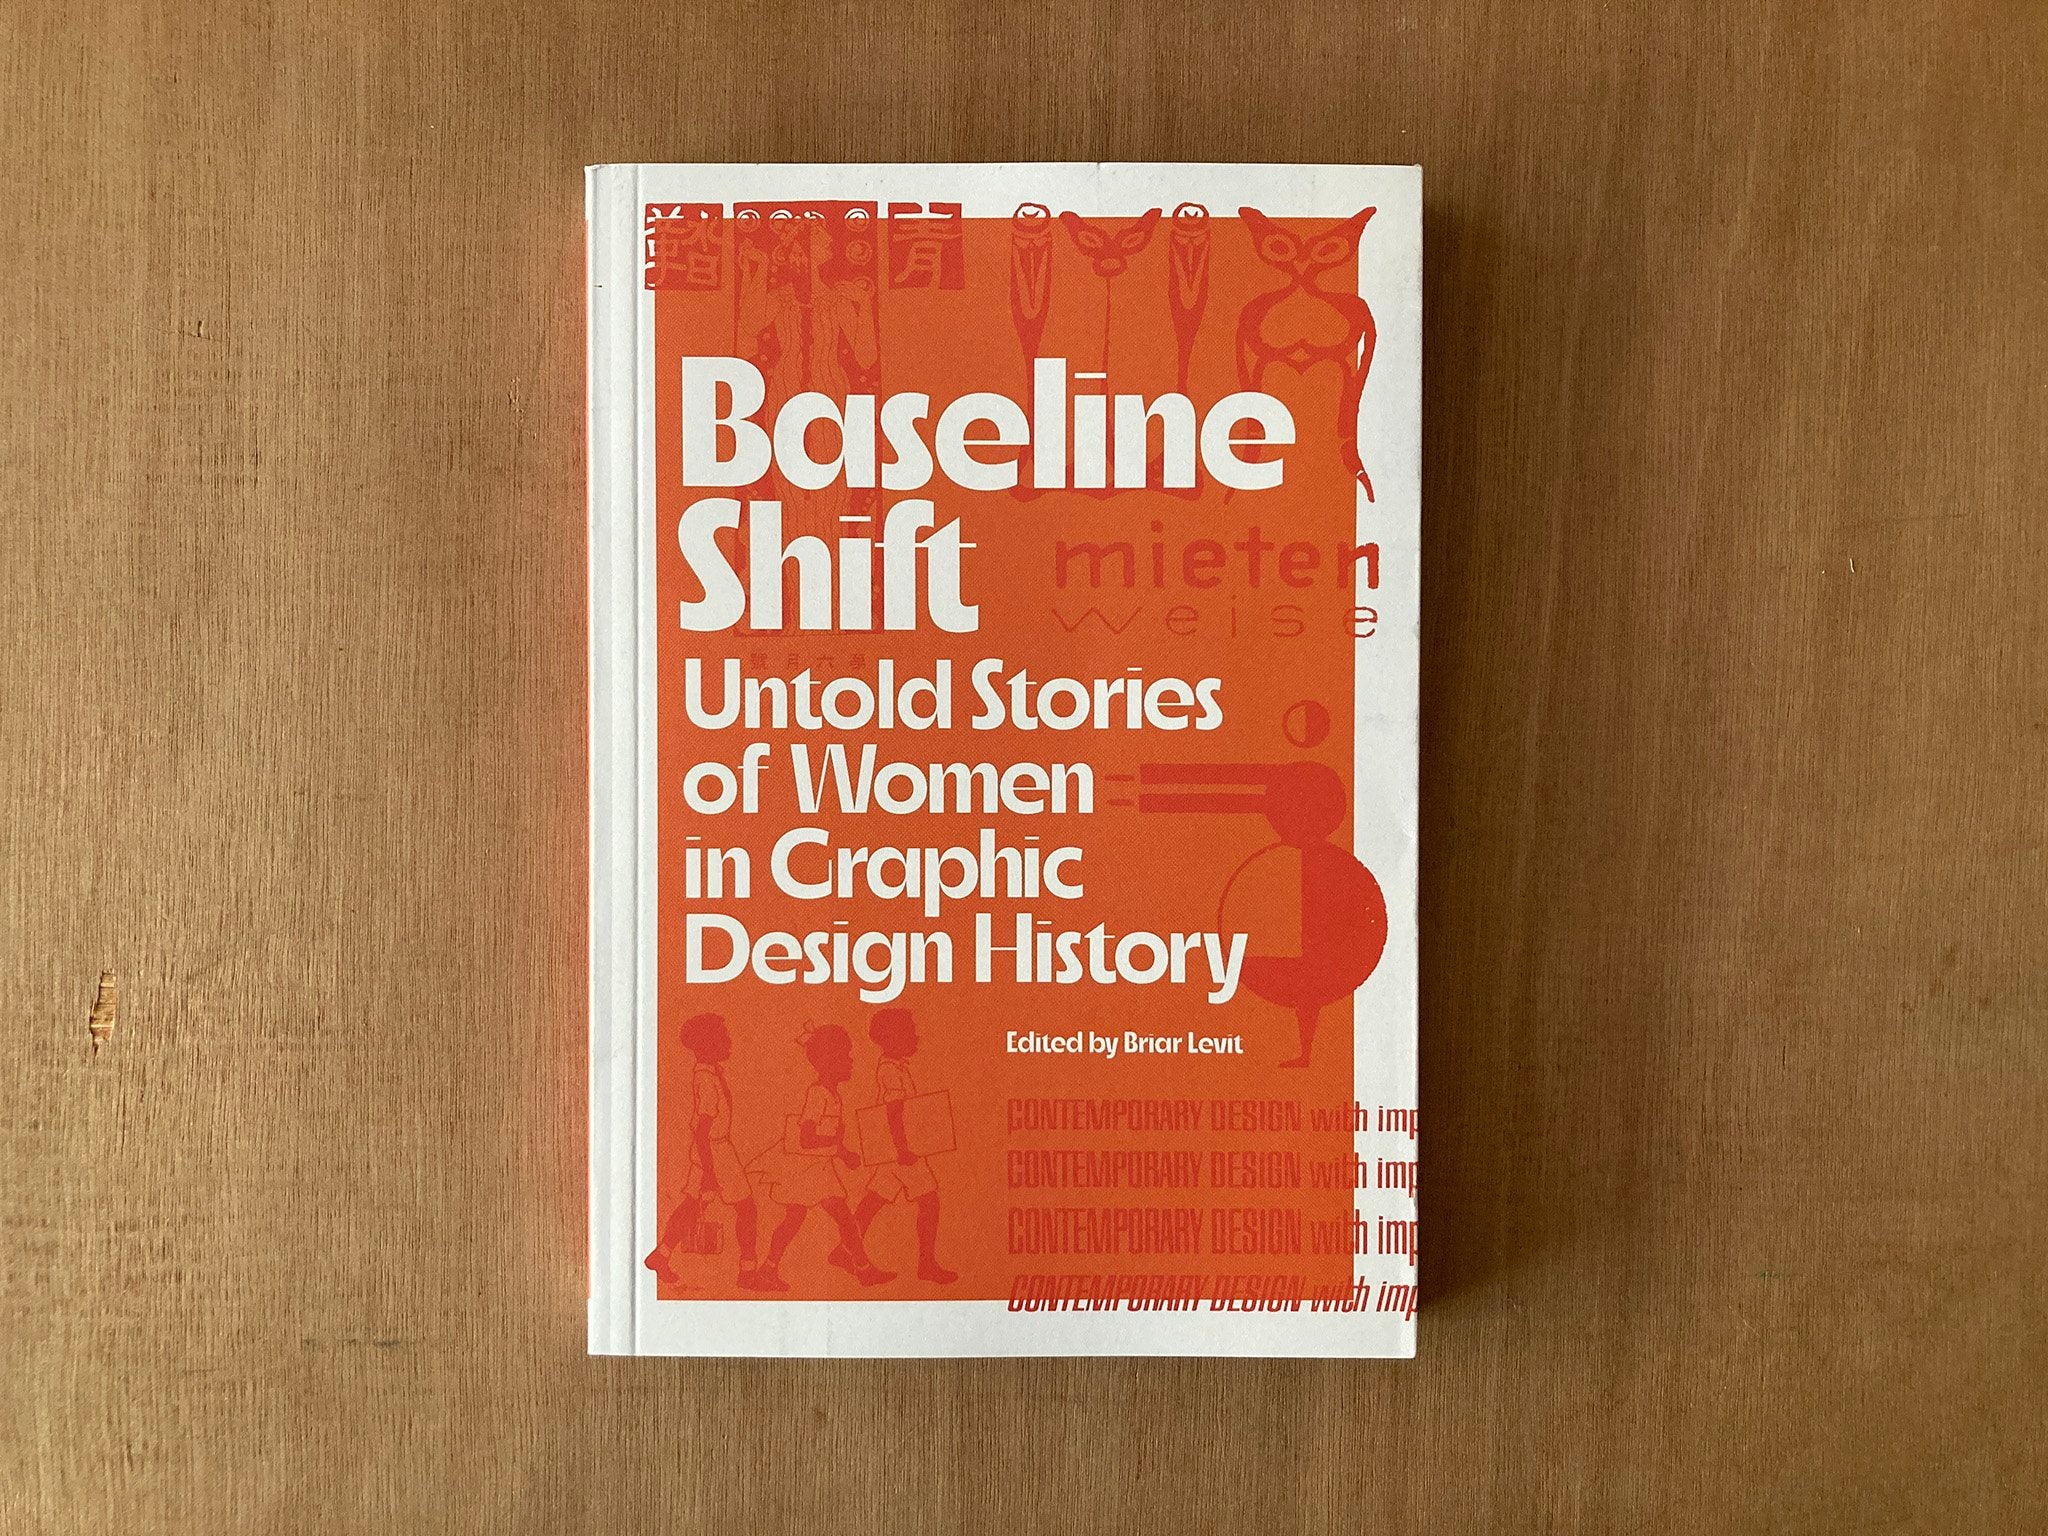 BASELINE SHIFT: UNTOLD STORIES OF WOMEN IN GRAPHIC DESIGN edited by Briar Levit